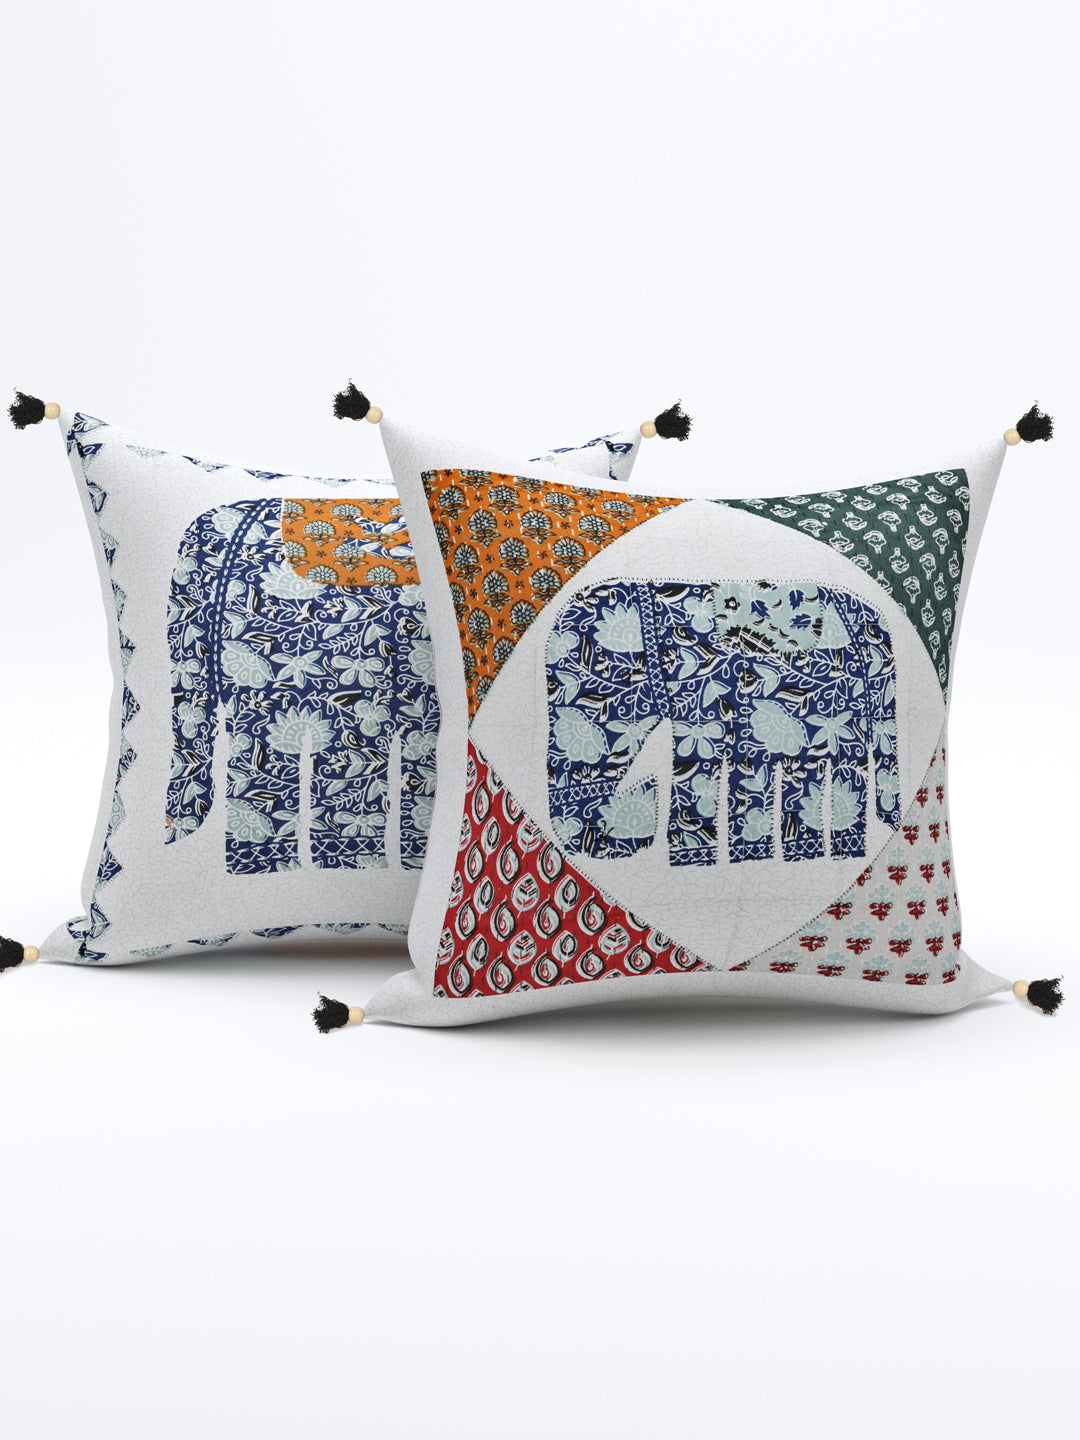 Living Roots Elephant Patchwork Cotton Cushion Cover- Set of 5 (40-028-C)